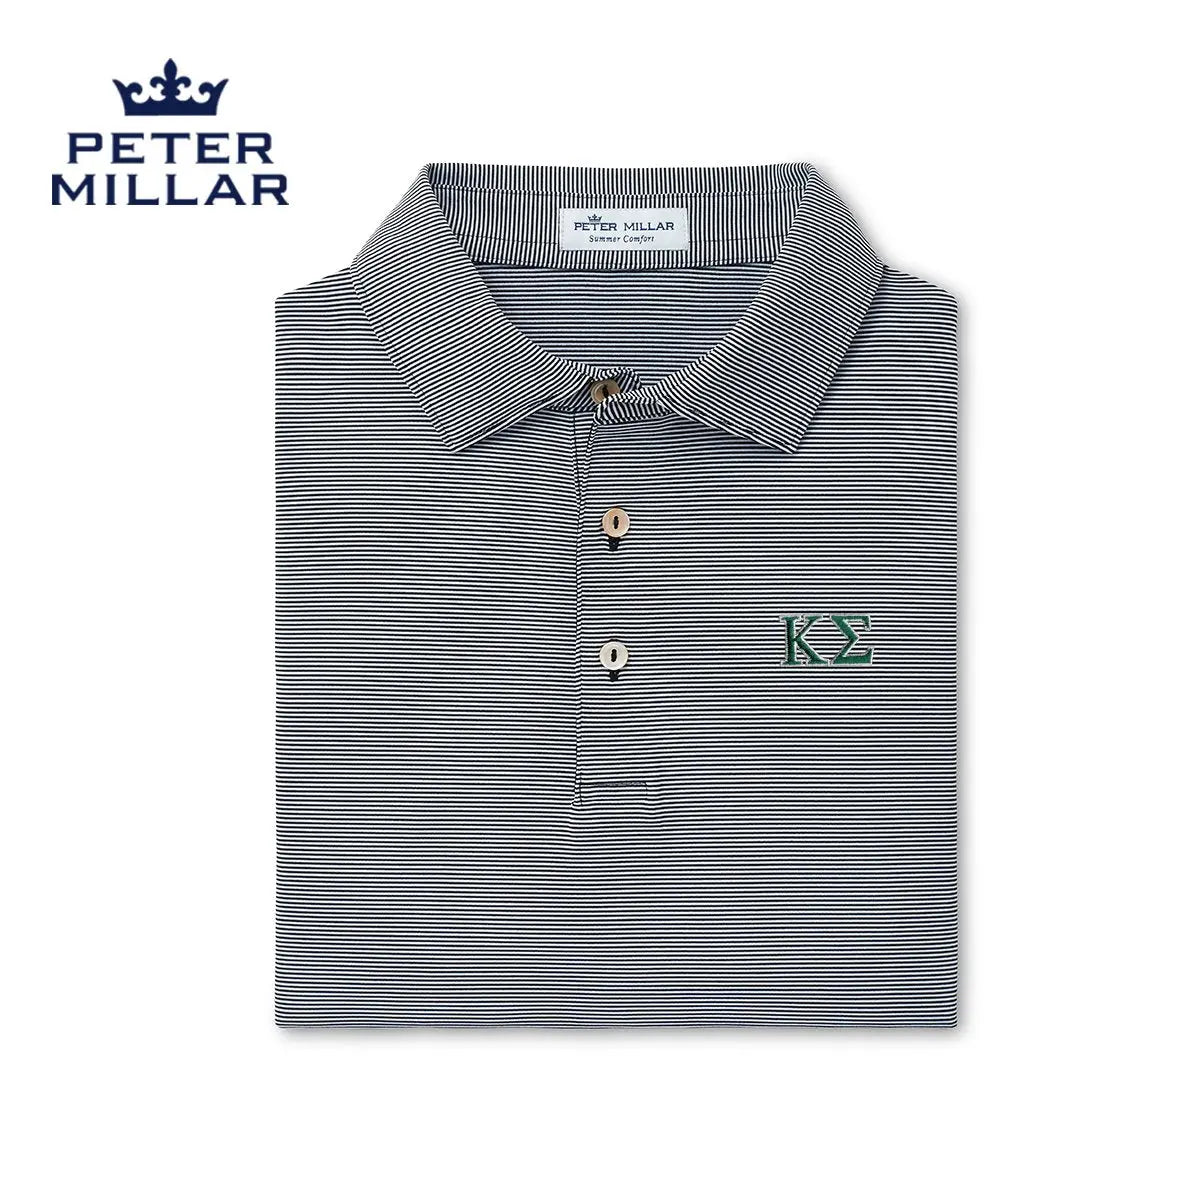 Kappa Sig Peter Millar Jubilee Stripe Stretch Jersey Polo with Greek Letters - Kappa Sigma Official Store